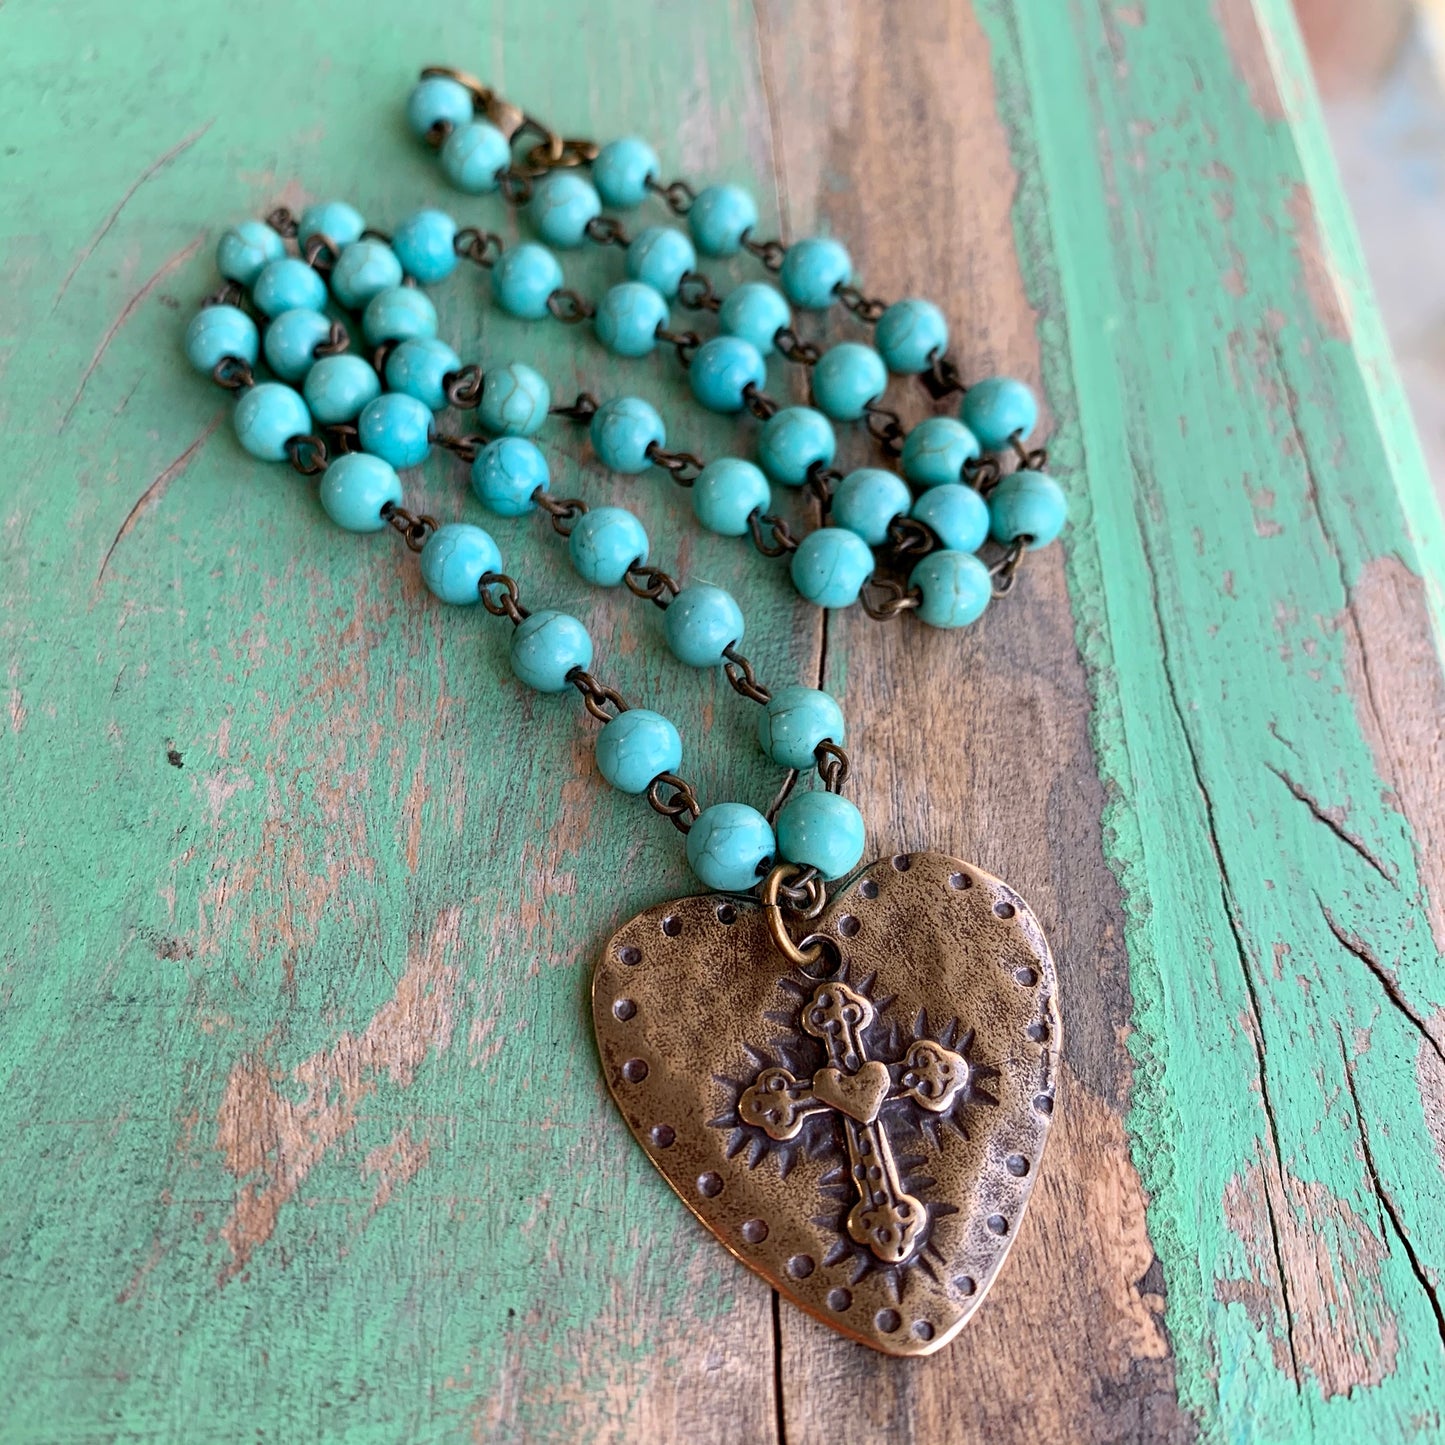 Turquoise and Bronze Heart Necklace and Earrings